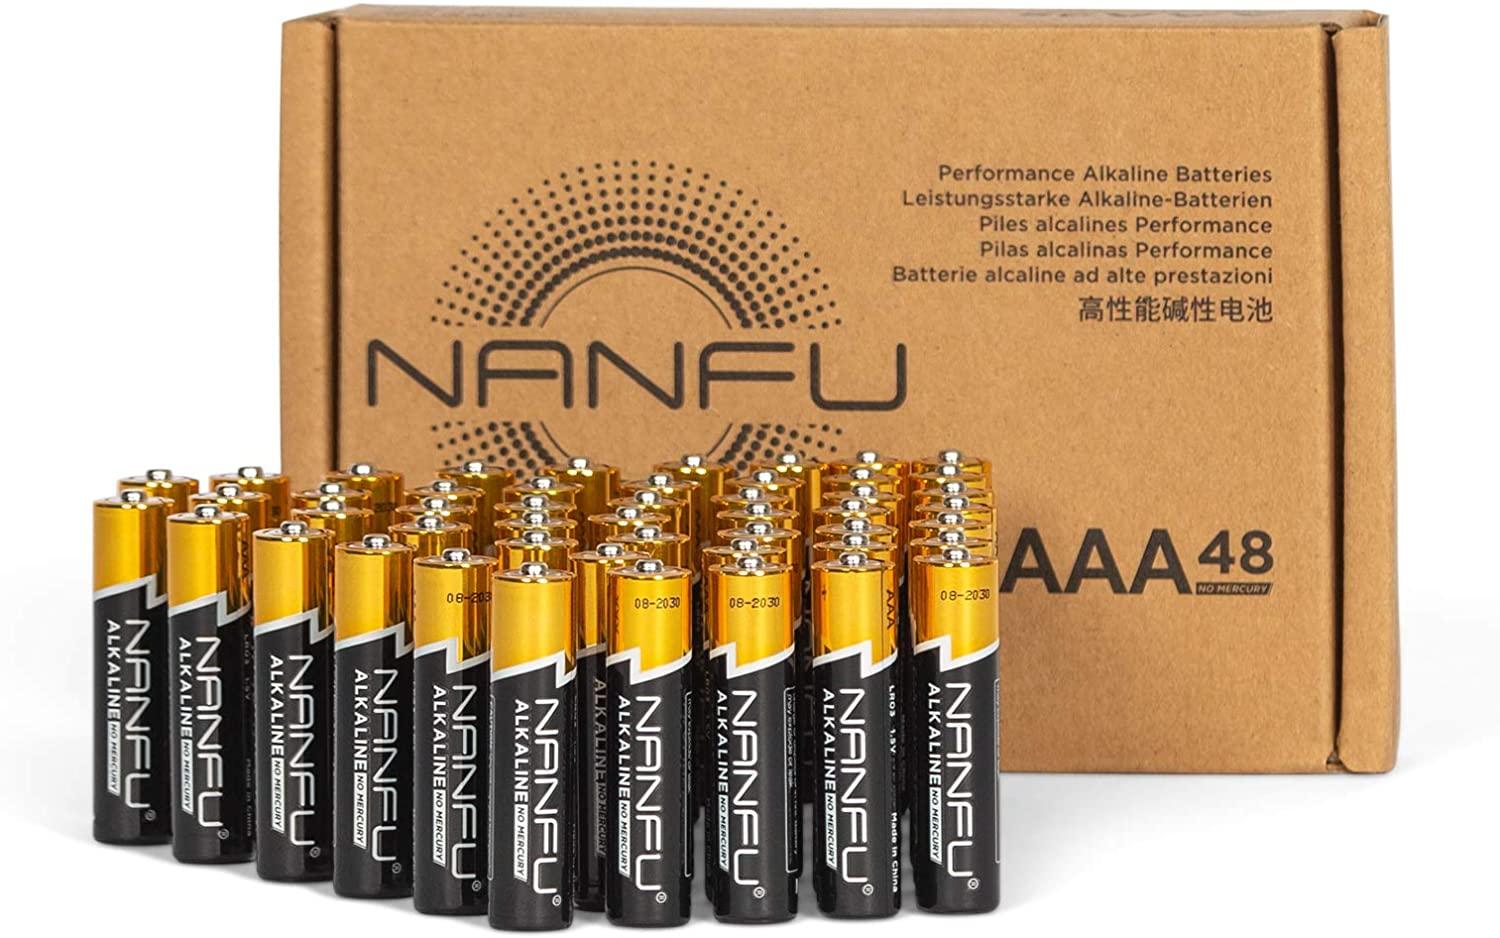 48 High Performance AA or AAA Alkaline Batteries for $8.59